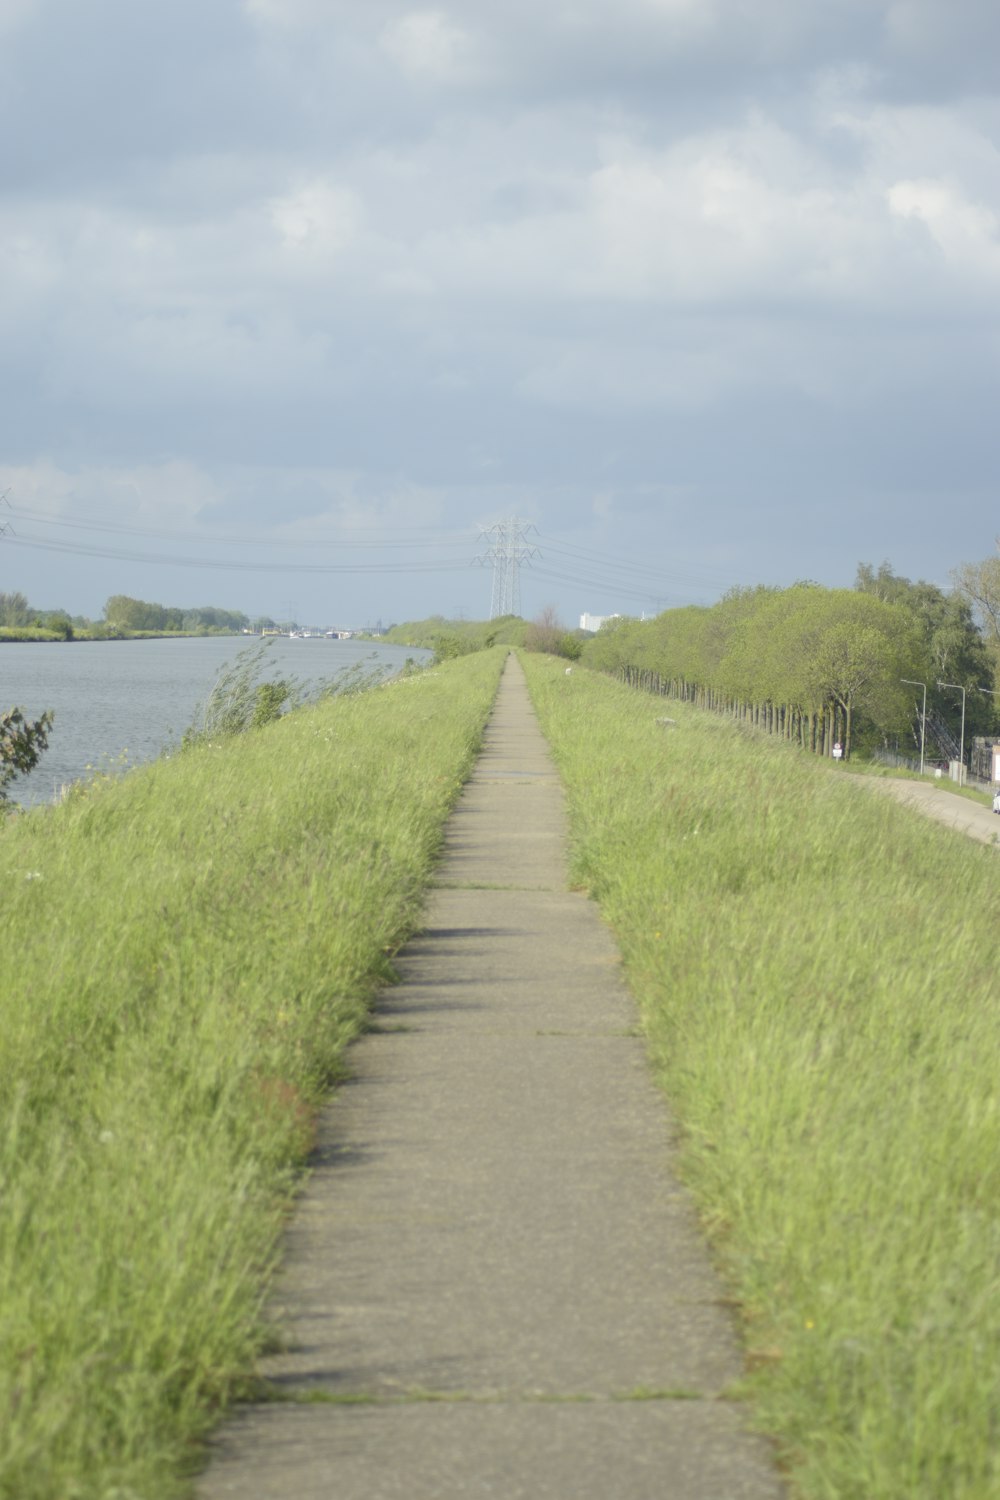 gray concrete pathway between green grass field near body of water during daytime